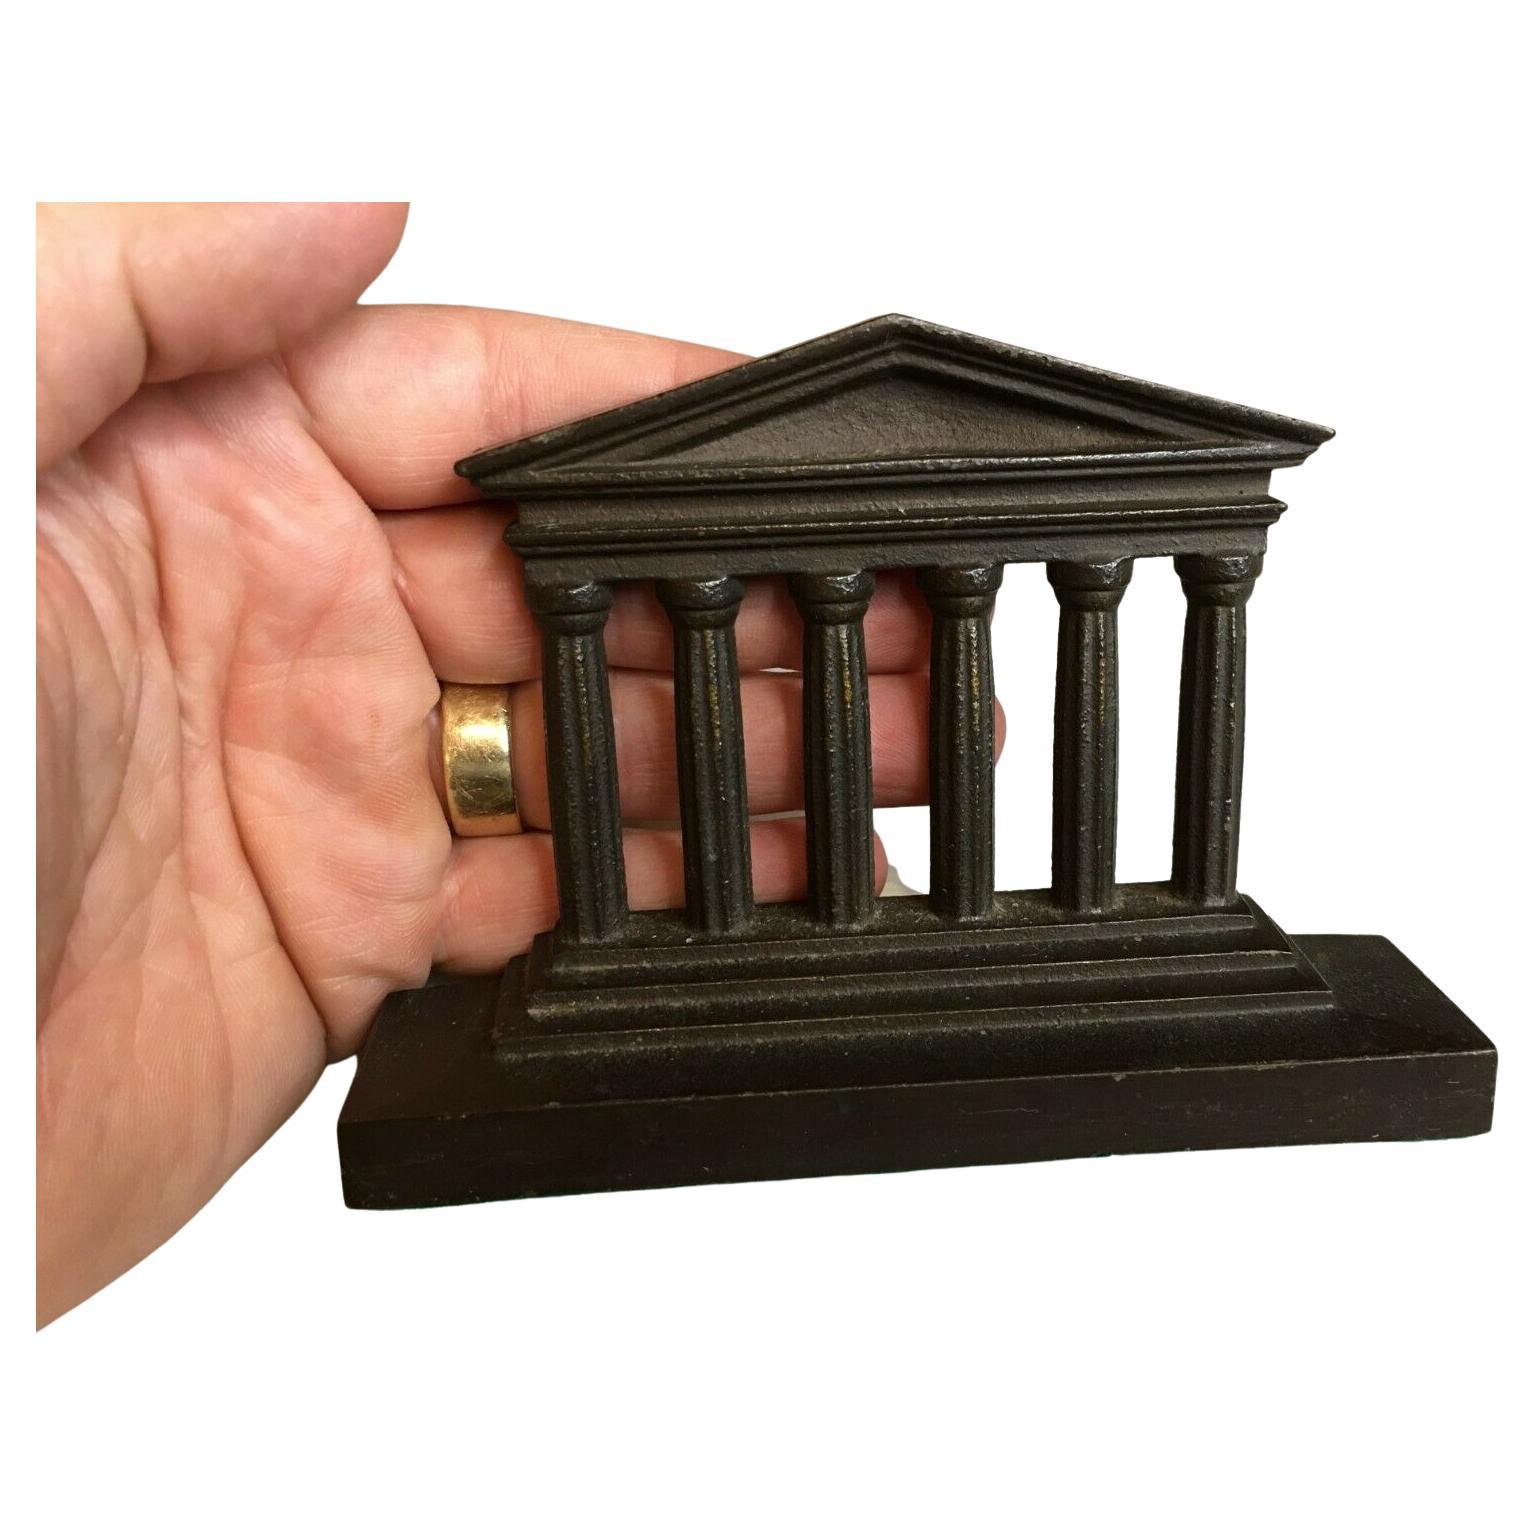 Antique
Bradley and Hubbard
Two matching bookends
Neoclassical design of a federal building (assumed to be either the Abraham or Jefferson Memorial Buildings of D.C)
Very fine detail
Lovely patina 

Bradley and Hubbard, “Masters of